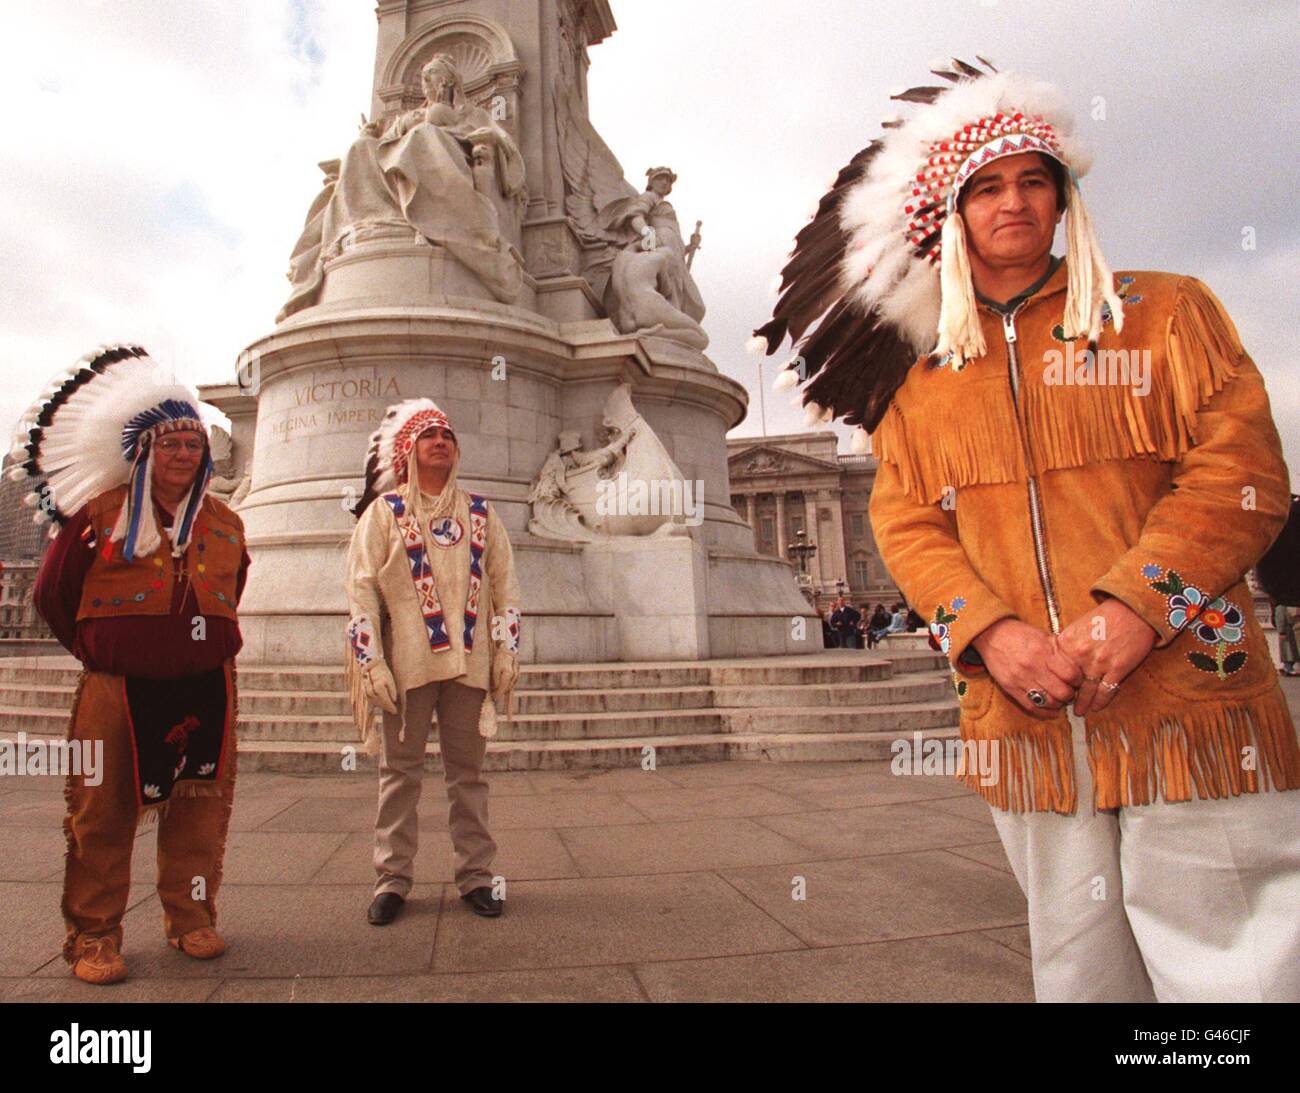 Chief Ovide Mecredi (right), National Chief of the prinicpal Canadian Indian organisation, with Chief Ray Roger (left), head of the Chippowas Indians, and Willie Littlechild, head of the Cree Indians, infront of the Queen Victoria Memorial outside Buckingham Palace this morning (Friday). Chief Mercredi has requested an audience with The Queen to ask her to honour treaties signed by Queen Victoria last century. Many Indians fear that an EU ban on fur imports will mean devastation for Indian and Inuit communitites dependant on fur trapping. Photo by David Giles/PA. Stock Photo